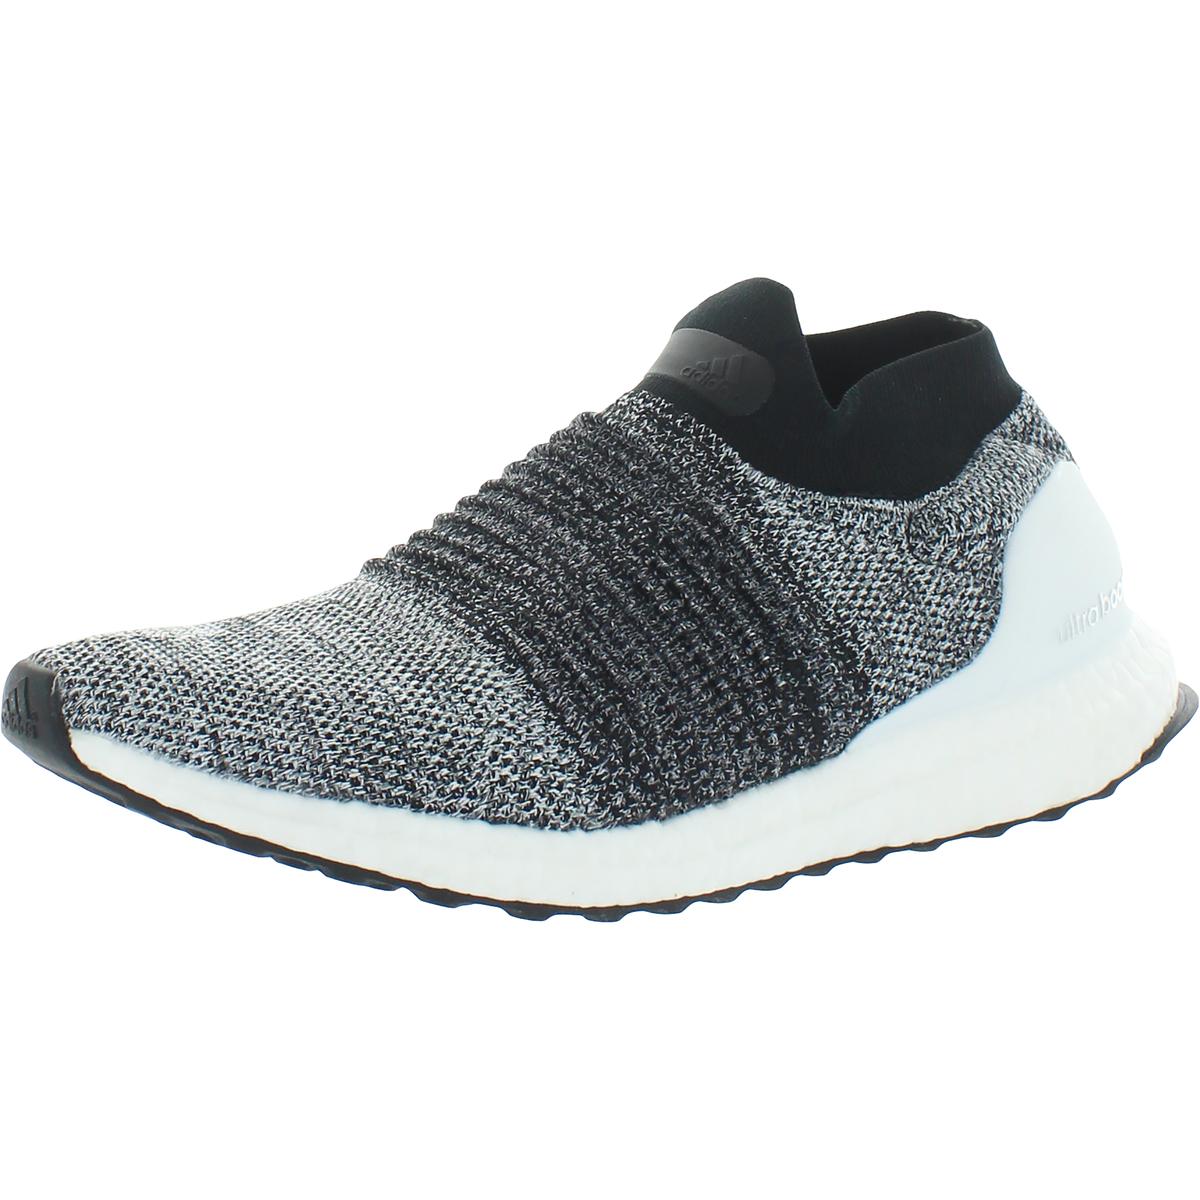 perspective protect basin Adidas Ultra Boost Mens Knit Laceless Running Shoes